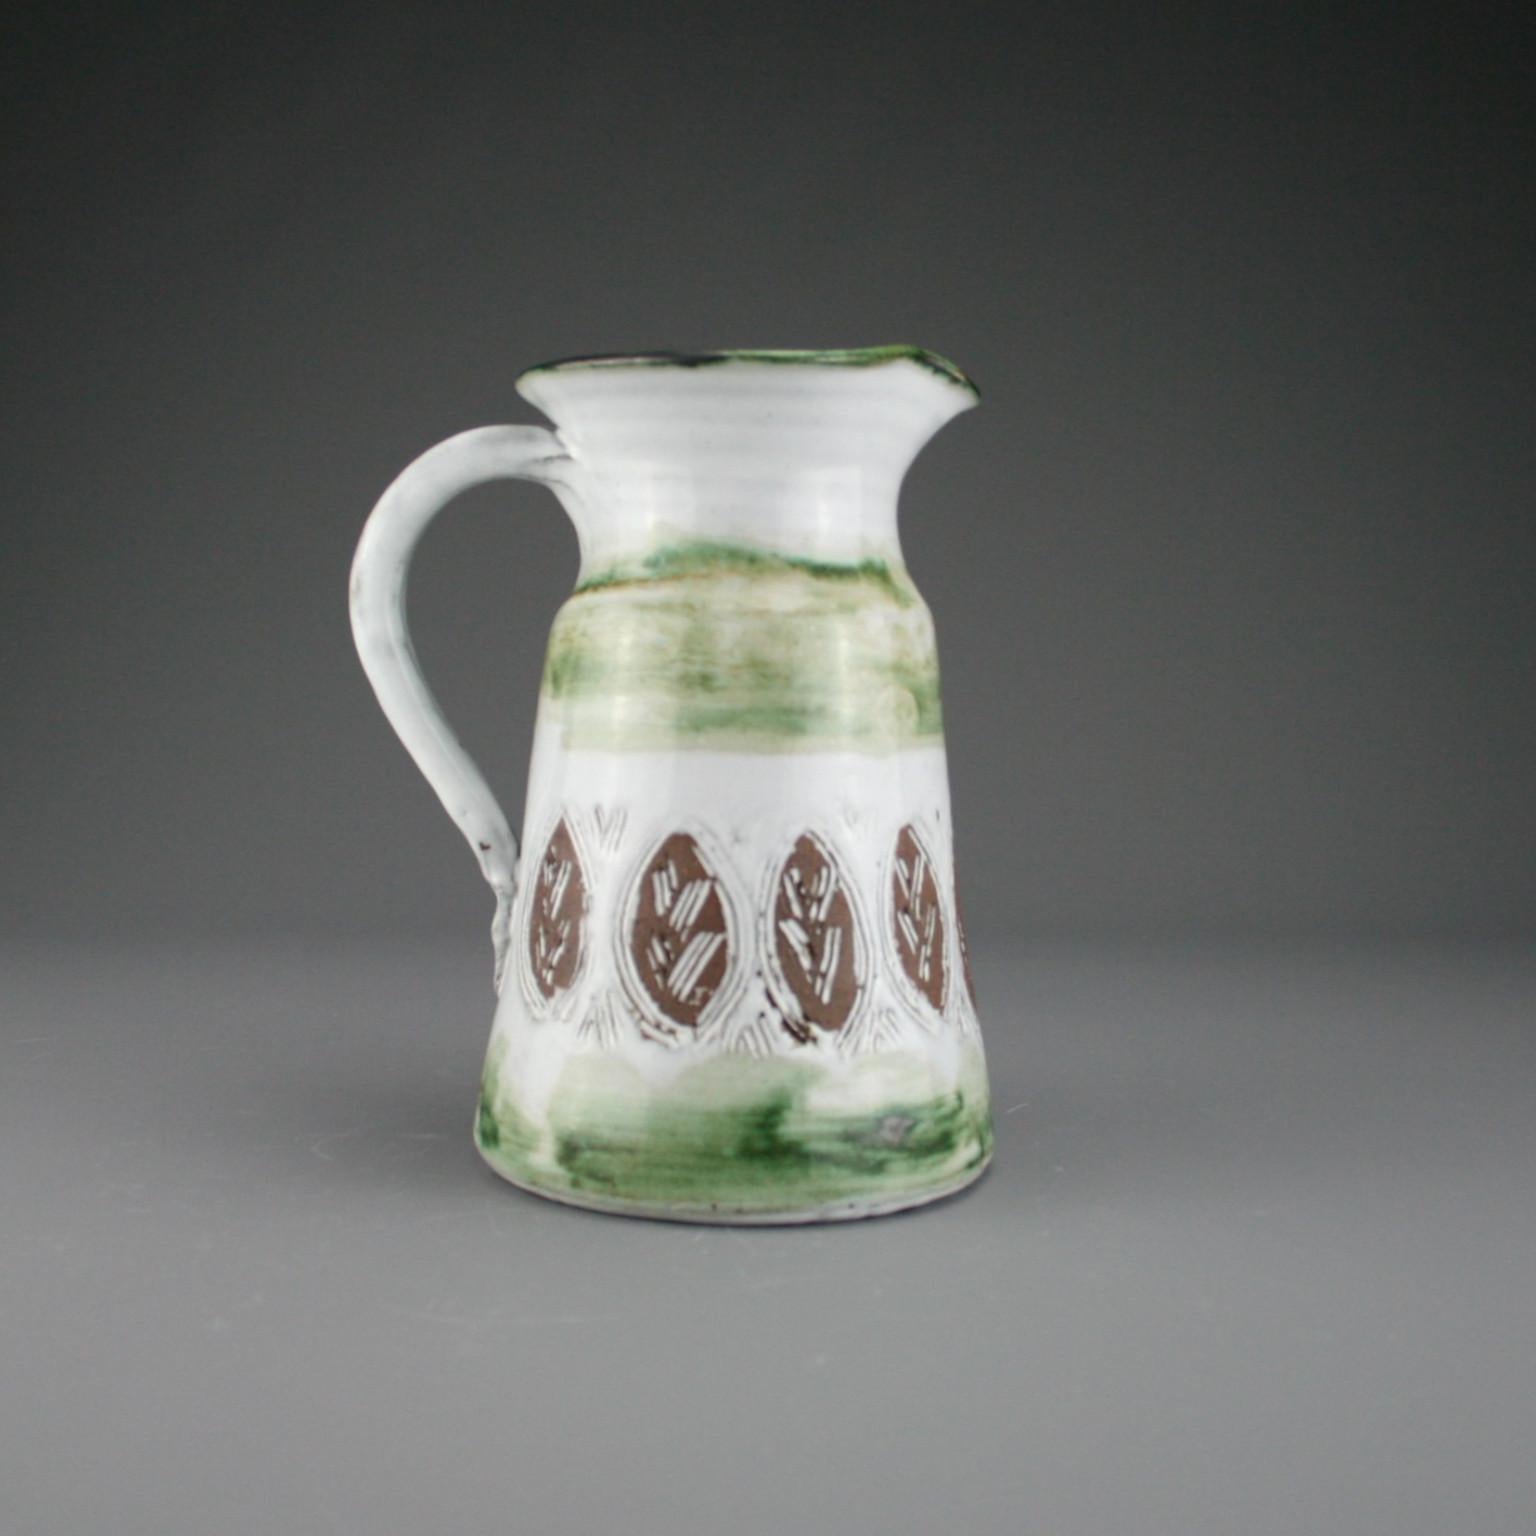 A charming and rustic French midcentury decorative pitcher by Albert and Pyot Thiry, circa 1960s. A soft green glaze encircles the exterior of the pitcher which is decorated with an incised repeating floral motif exposing the brown clay underneath.